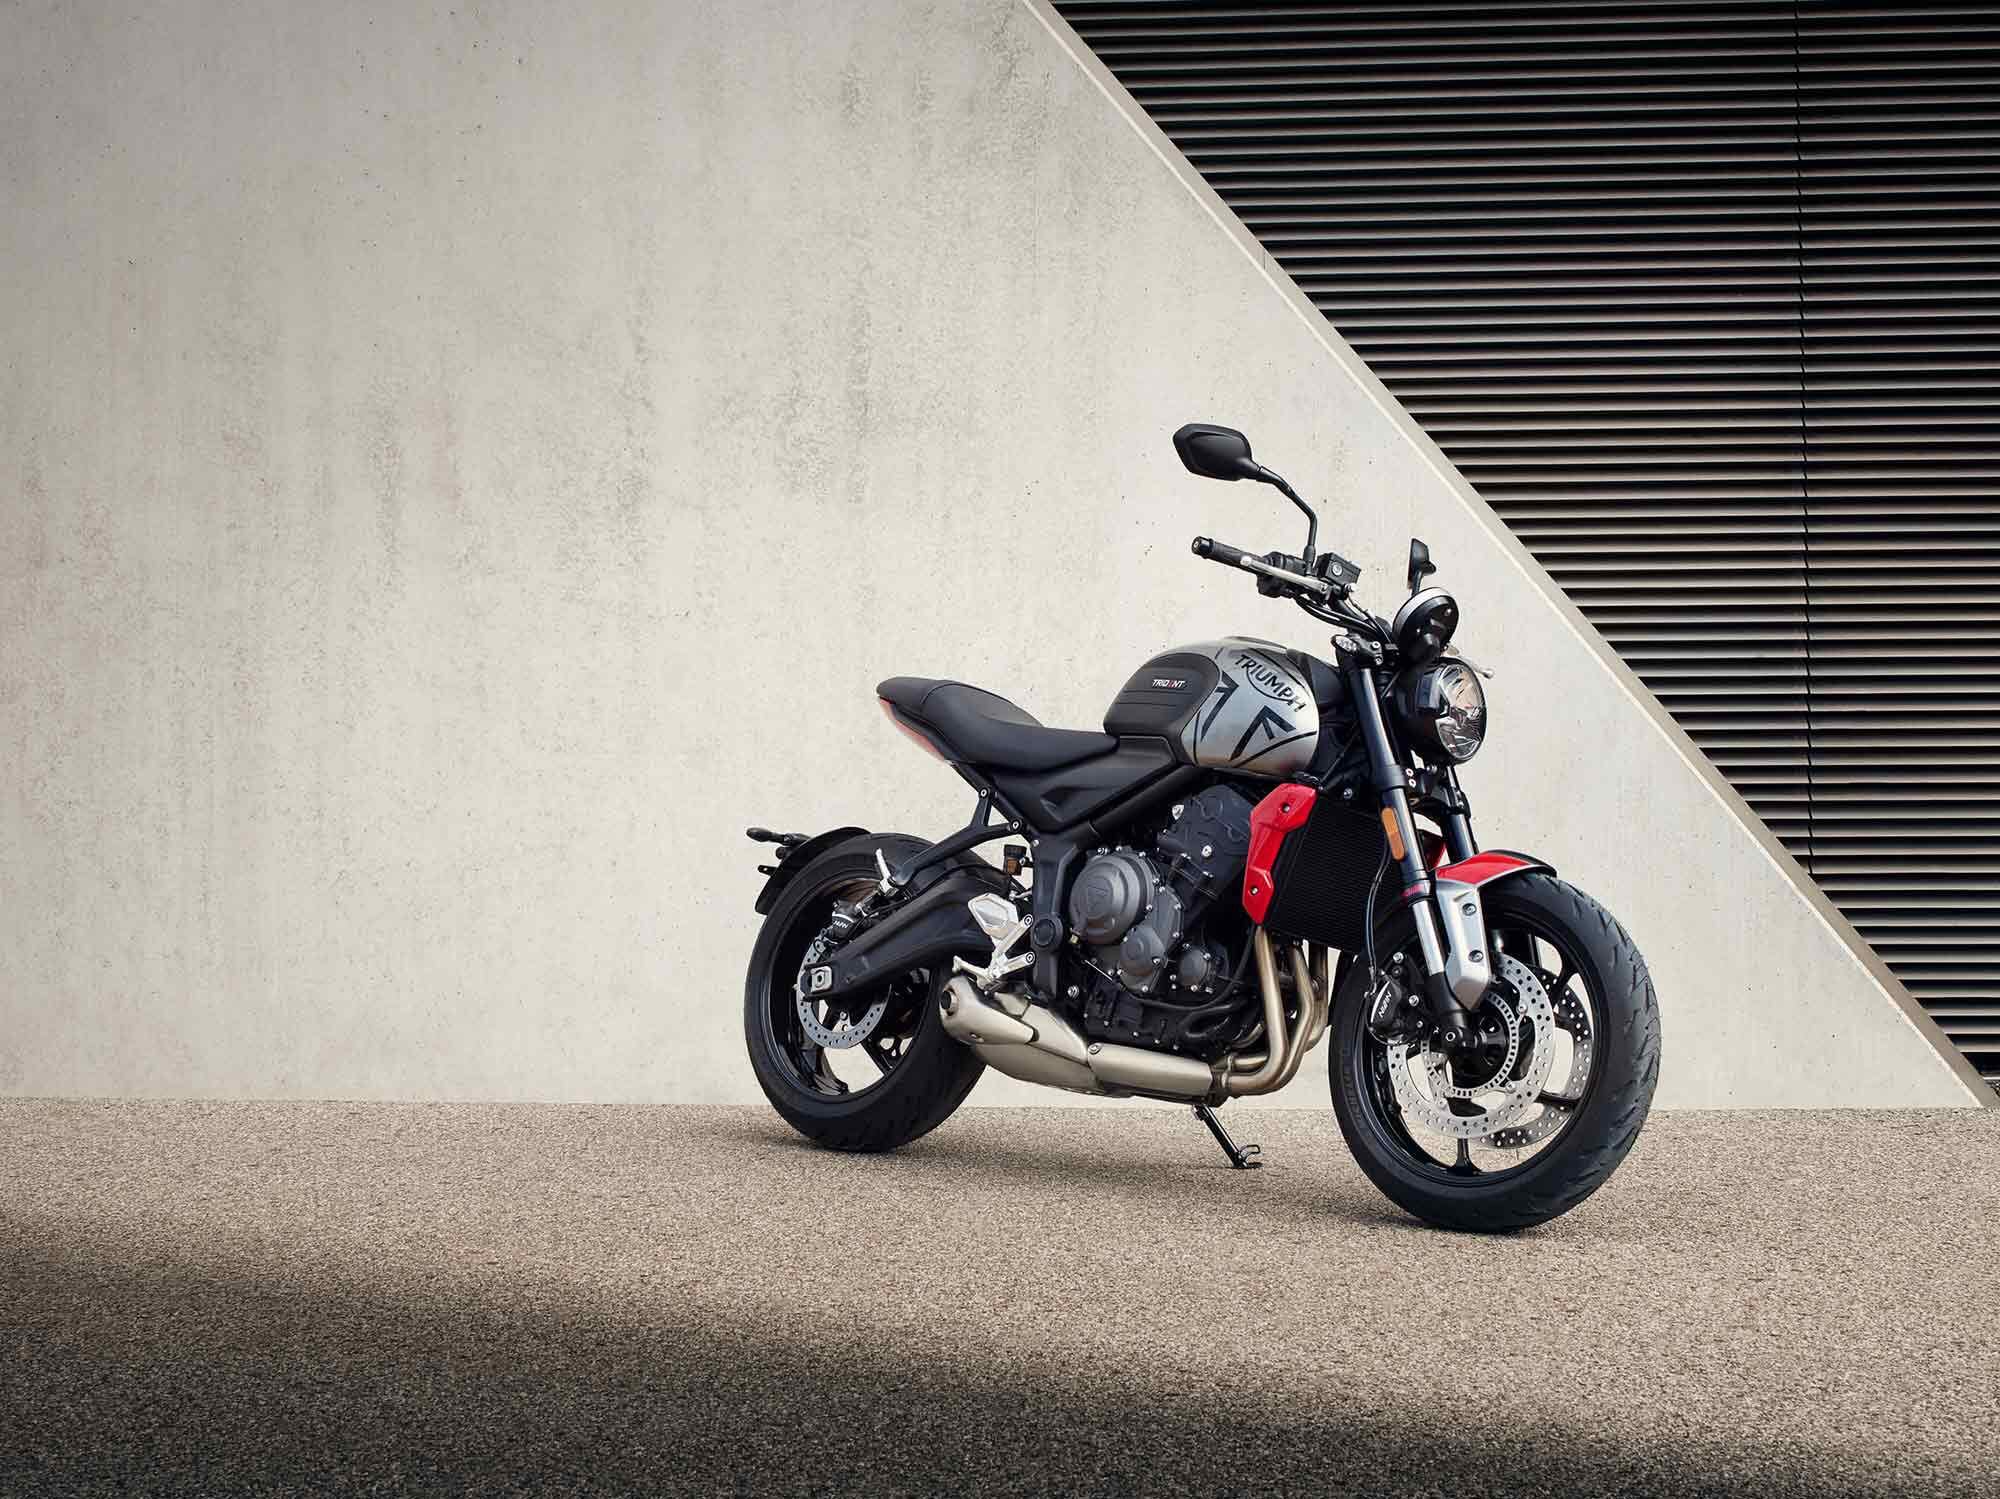 The Trident 660 is one of the most approachable and affordable options in Triumph’s lineup, yet the bike makes no sacrifices in performance or in fit and finish